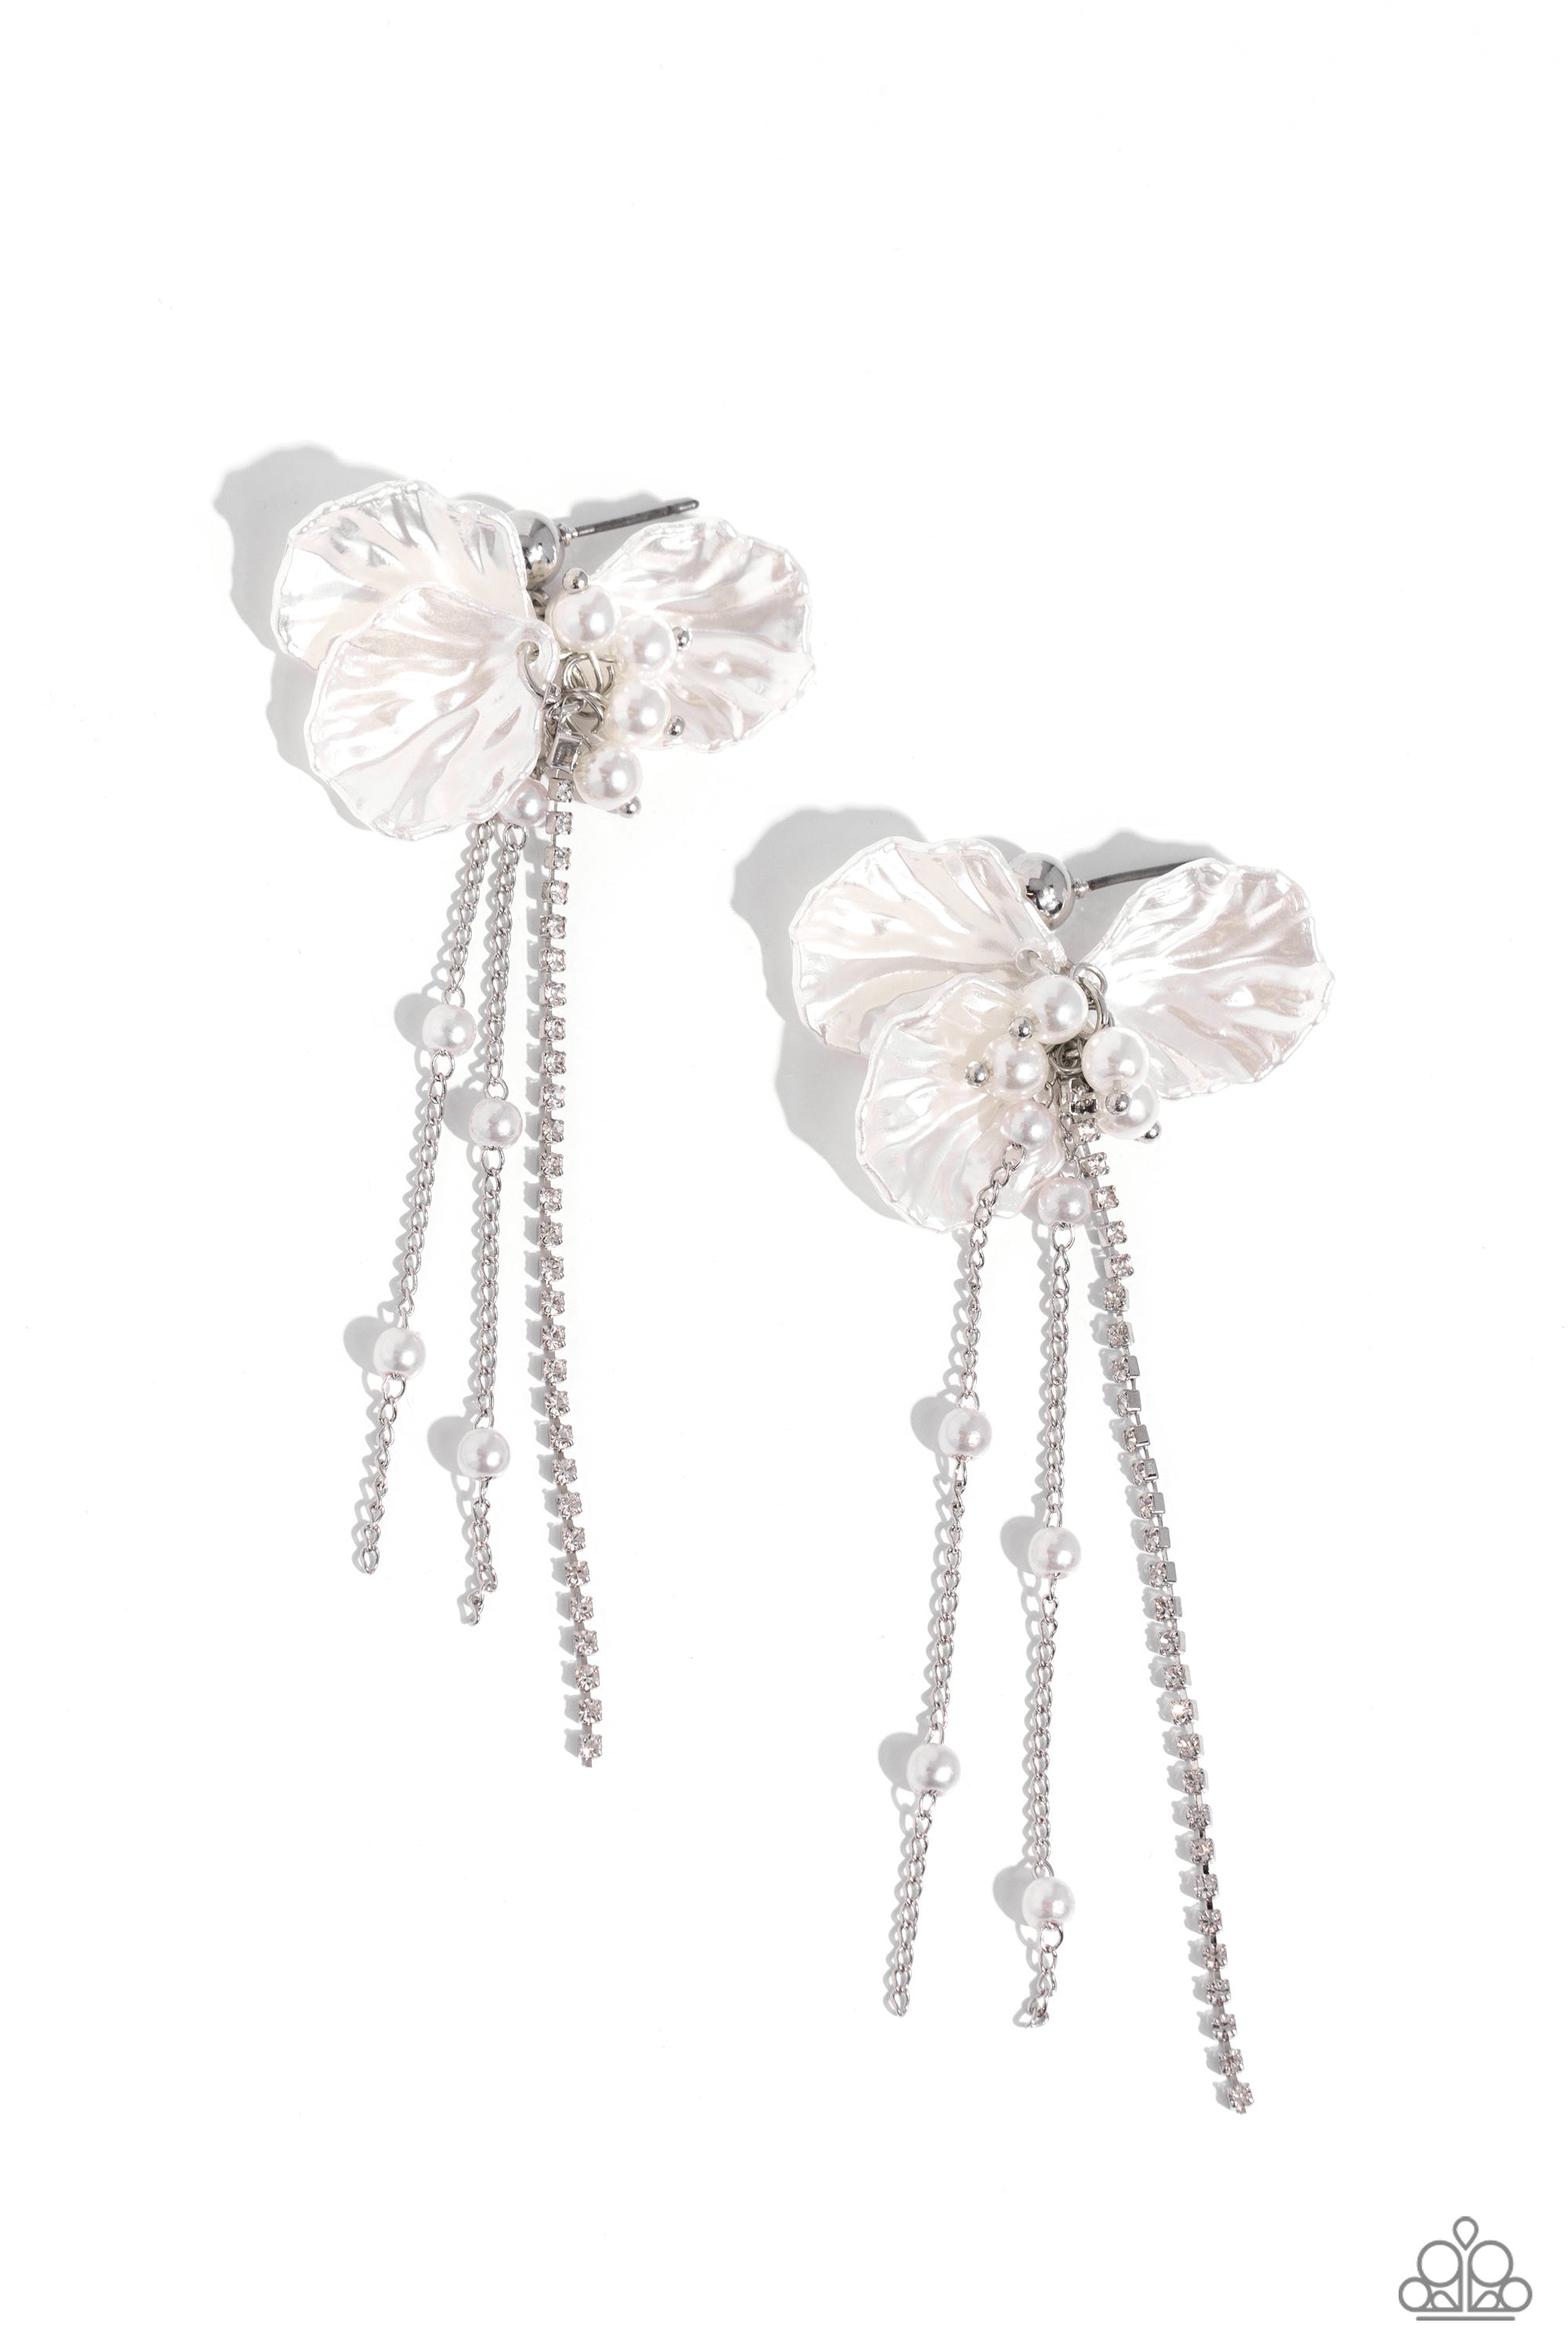 Graceful Gesture White Petal, Rhinestone and Pearl Earrings - Paparazzi Accessories- lightbox - CarasShop.com - $5 Jewelry by Cara Jewels